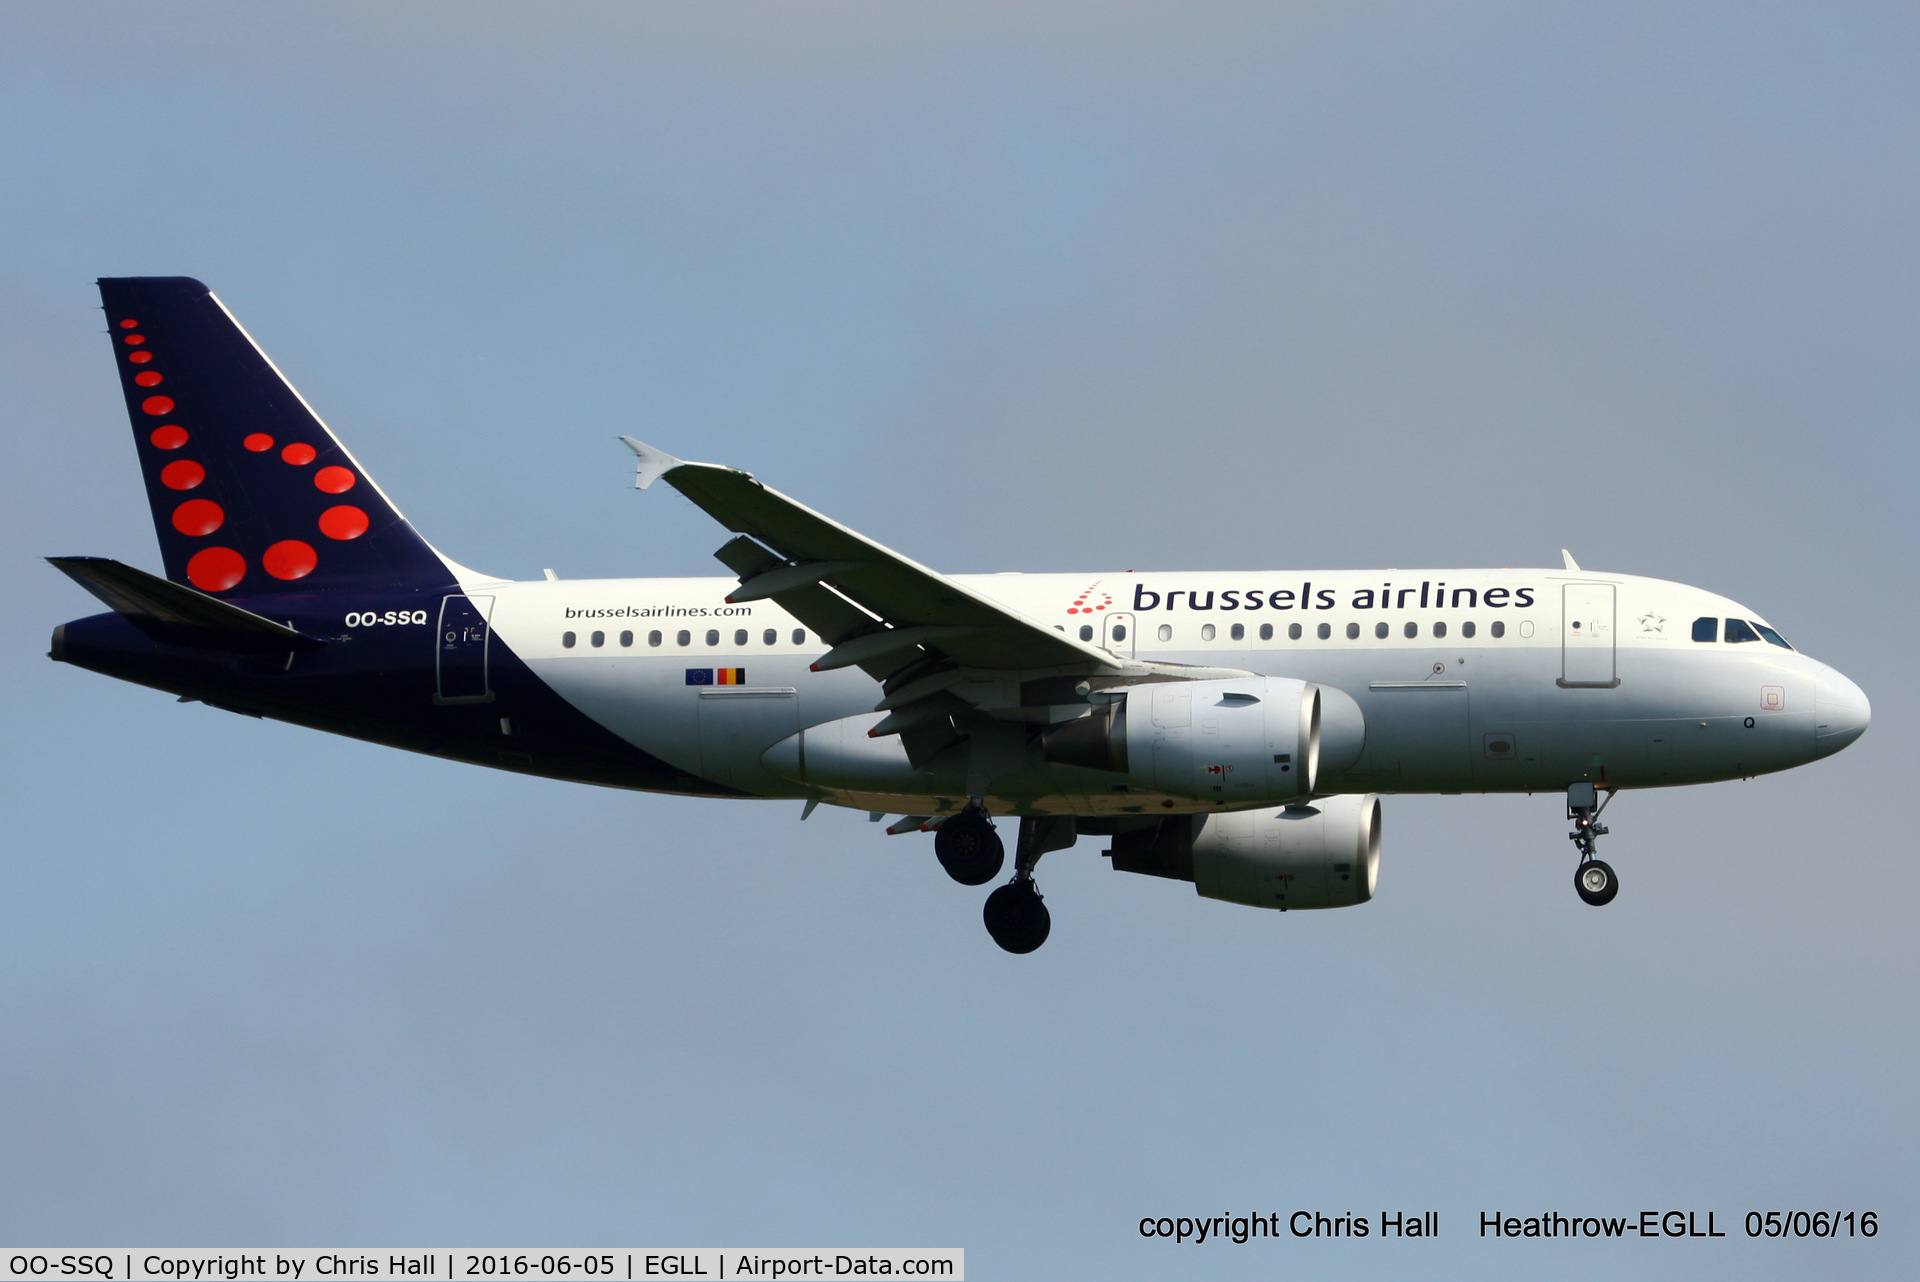 OO-SSQ, 2009 Airbus A319-112 C/N 3790, Brussels Airlines